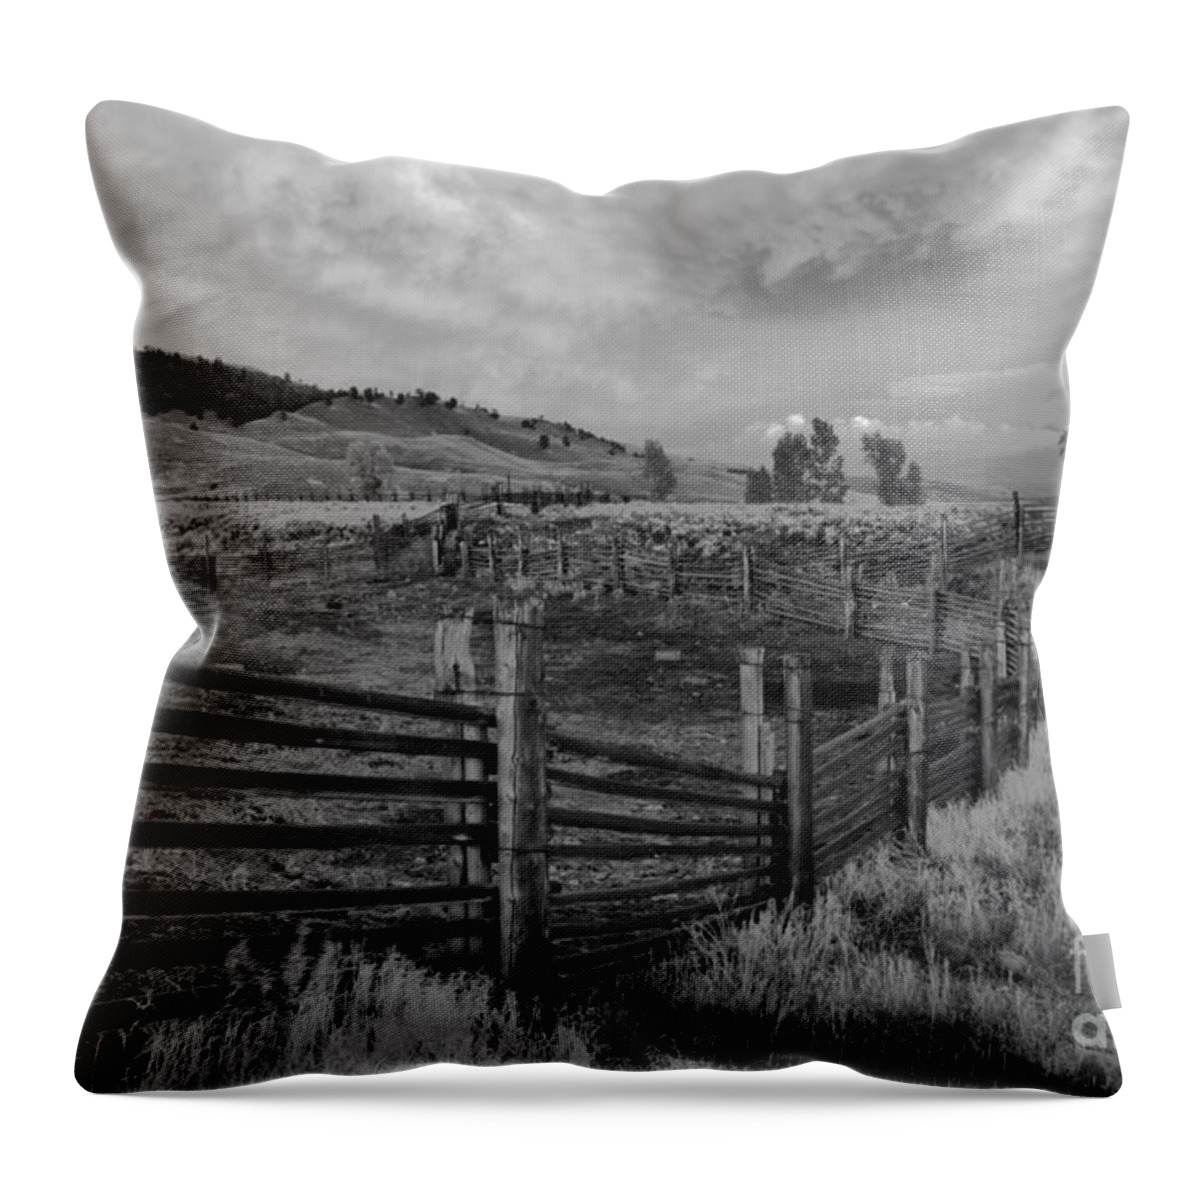  Throw Pillow featuring the photograph Yellowstone Lamar Ranch Sunset Black And White by Adam Jewell